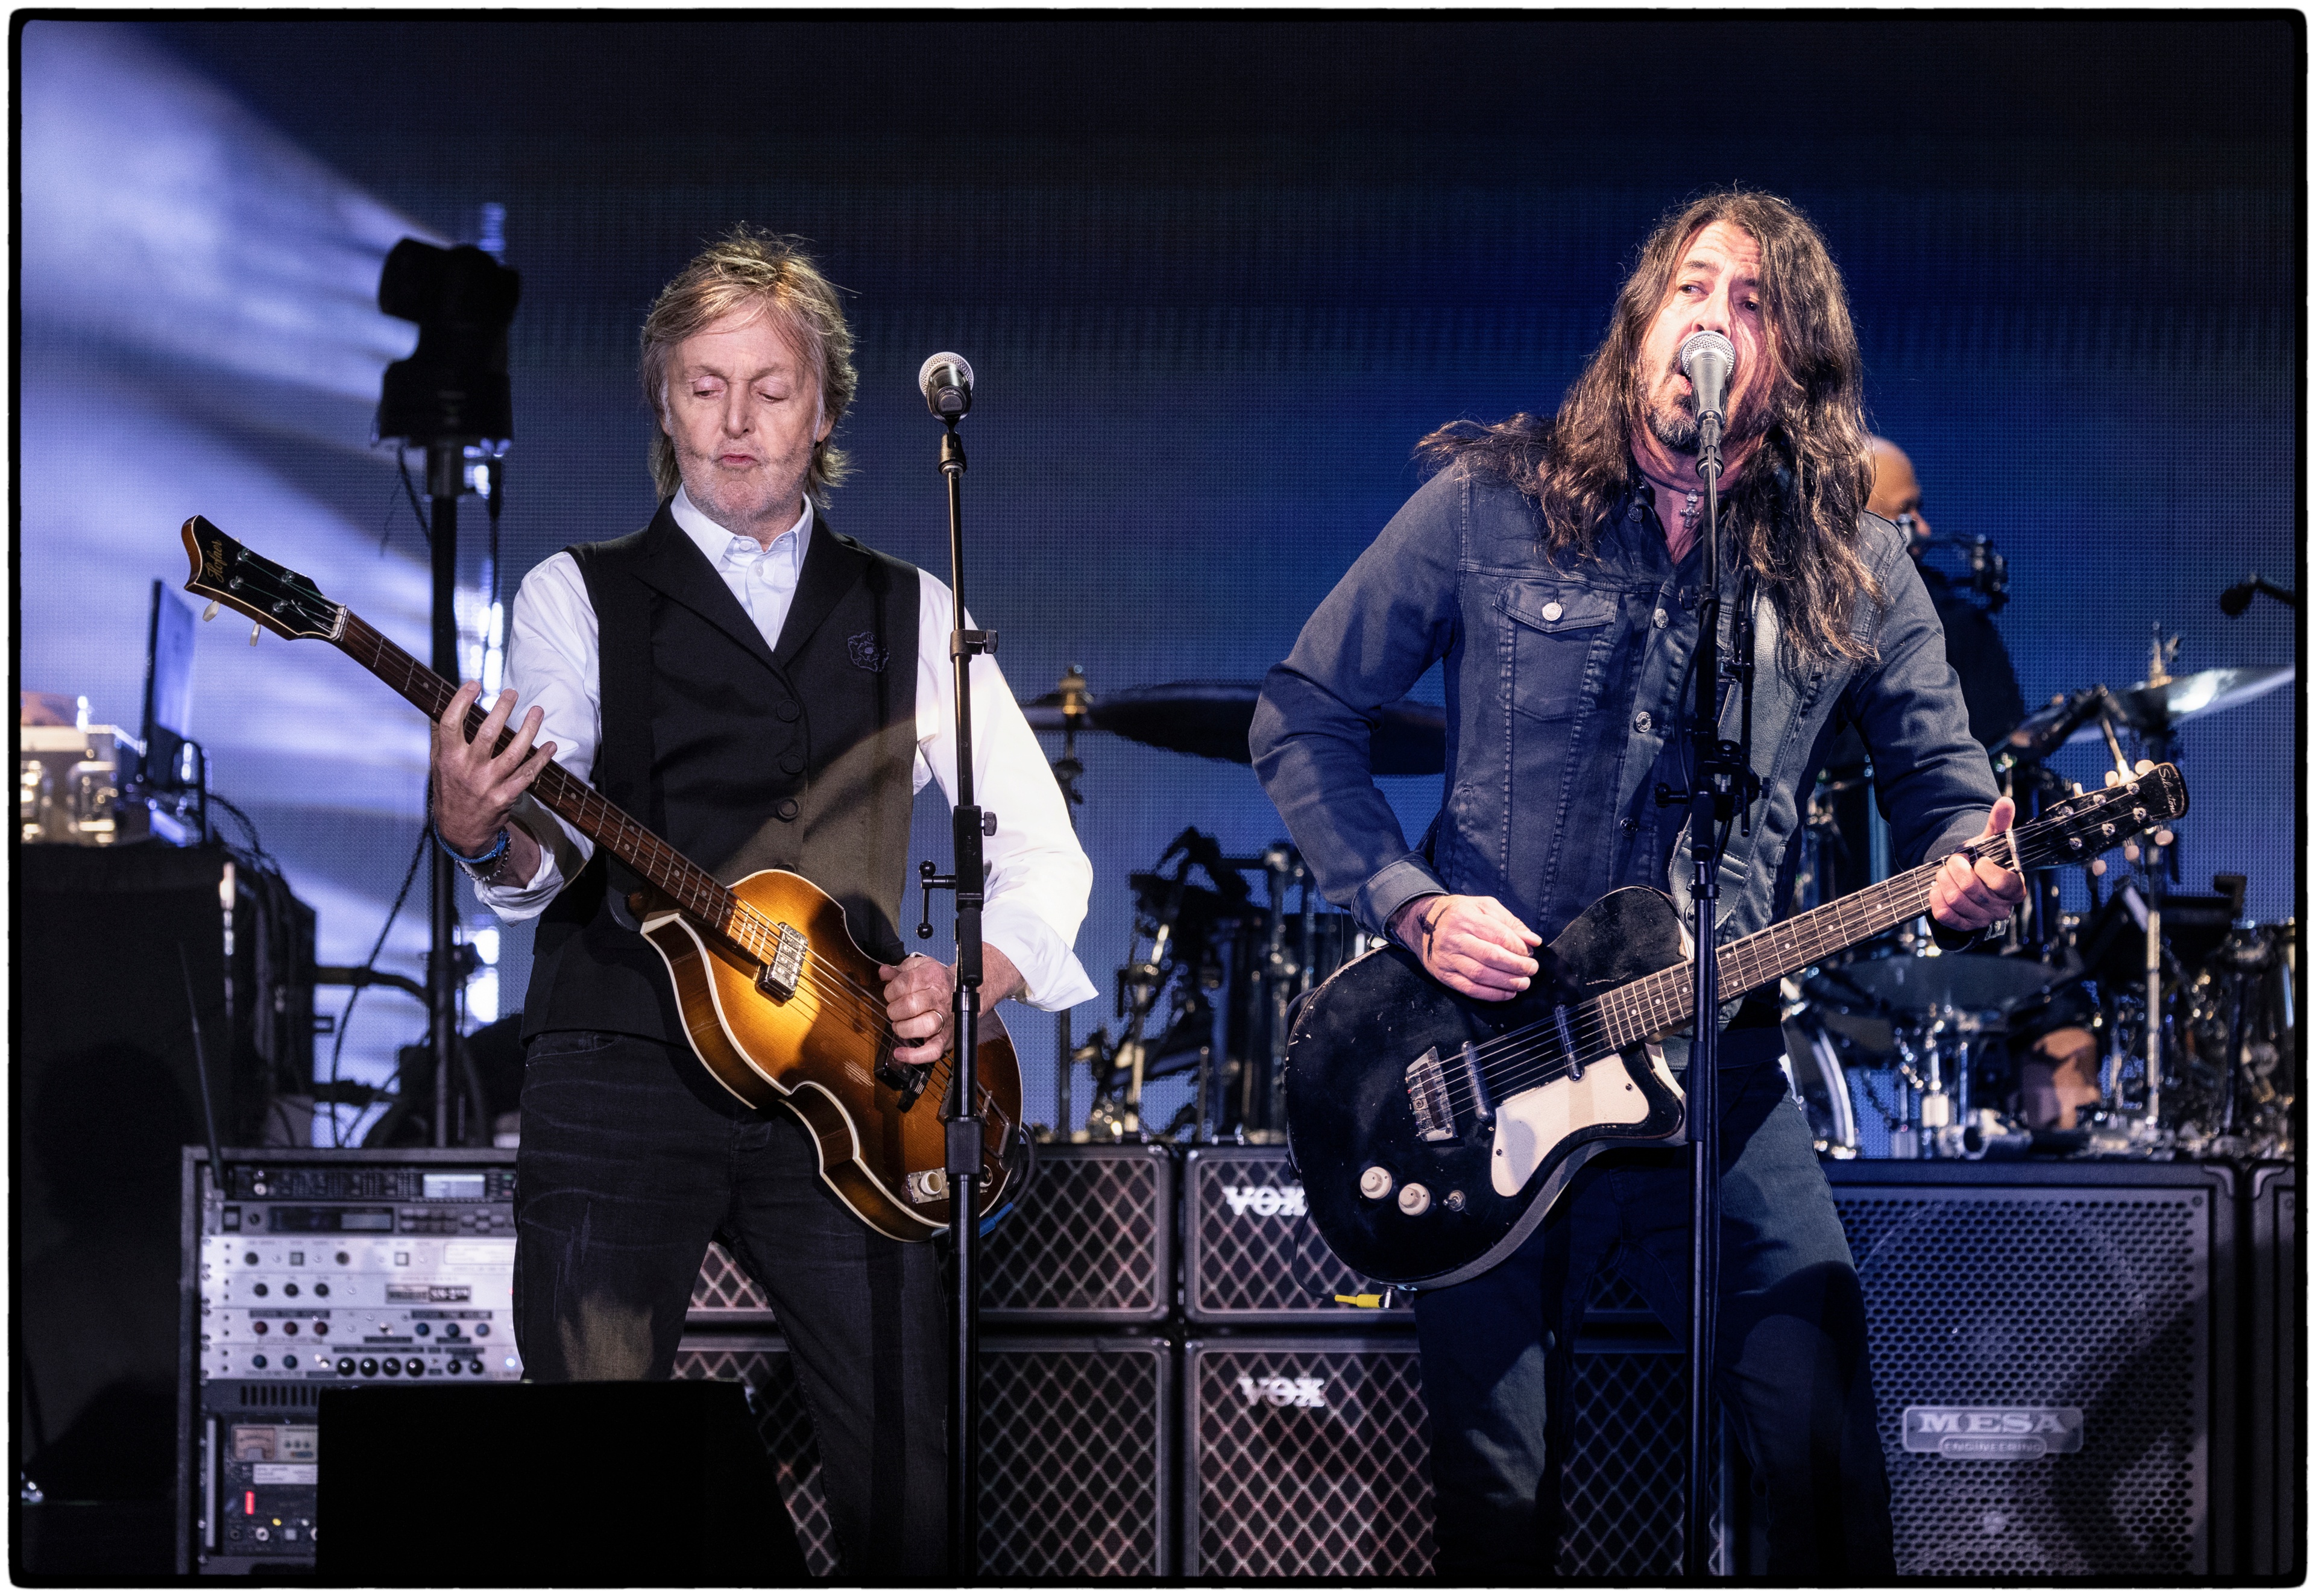 Paul plays guitar with Dave Grohl on stage at Glastonbury